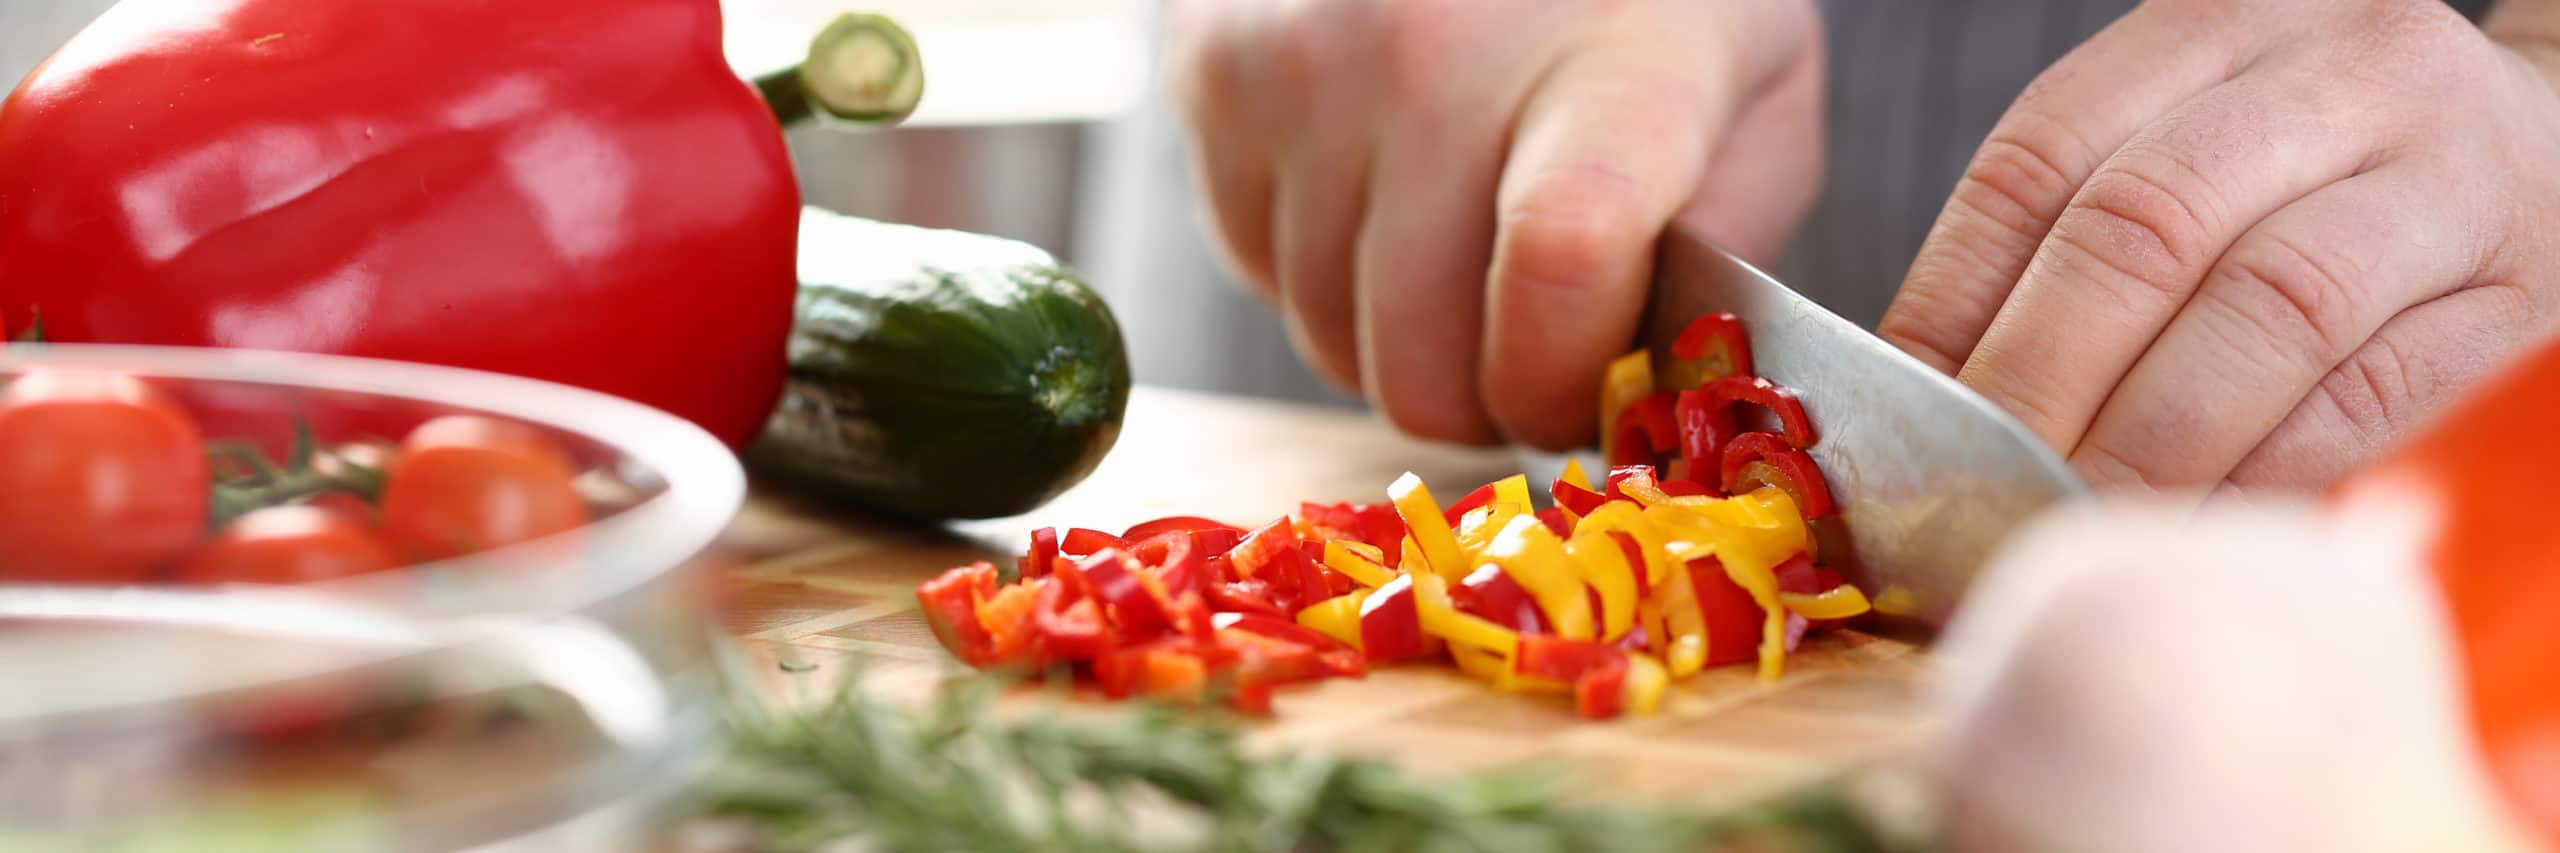 close up of chef slicing vegetables